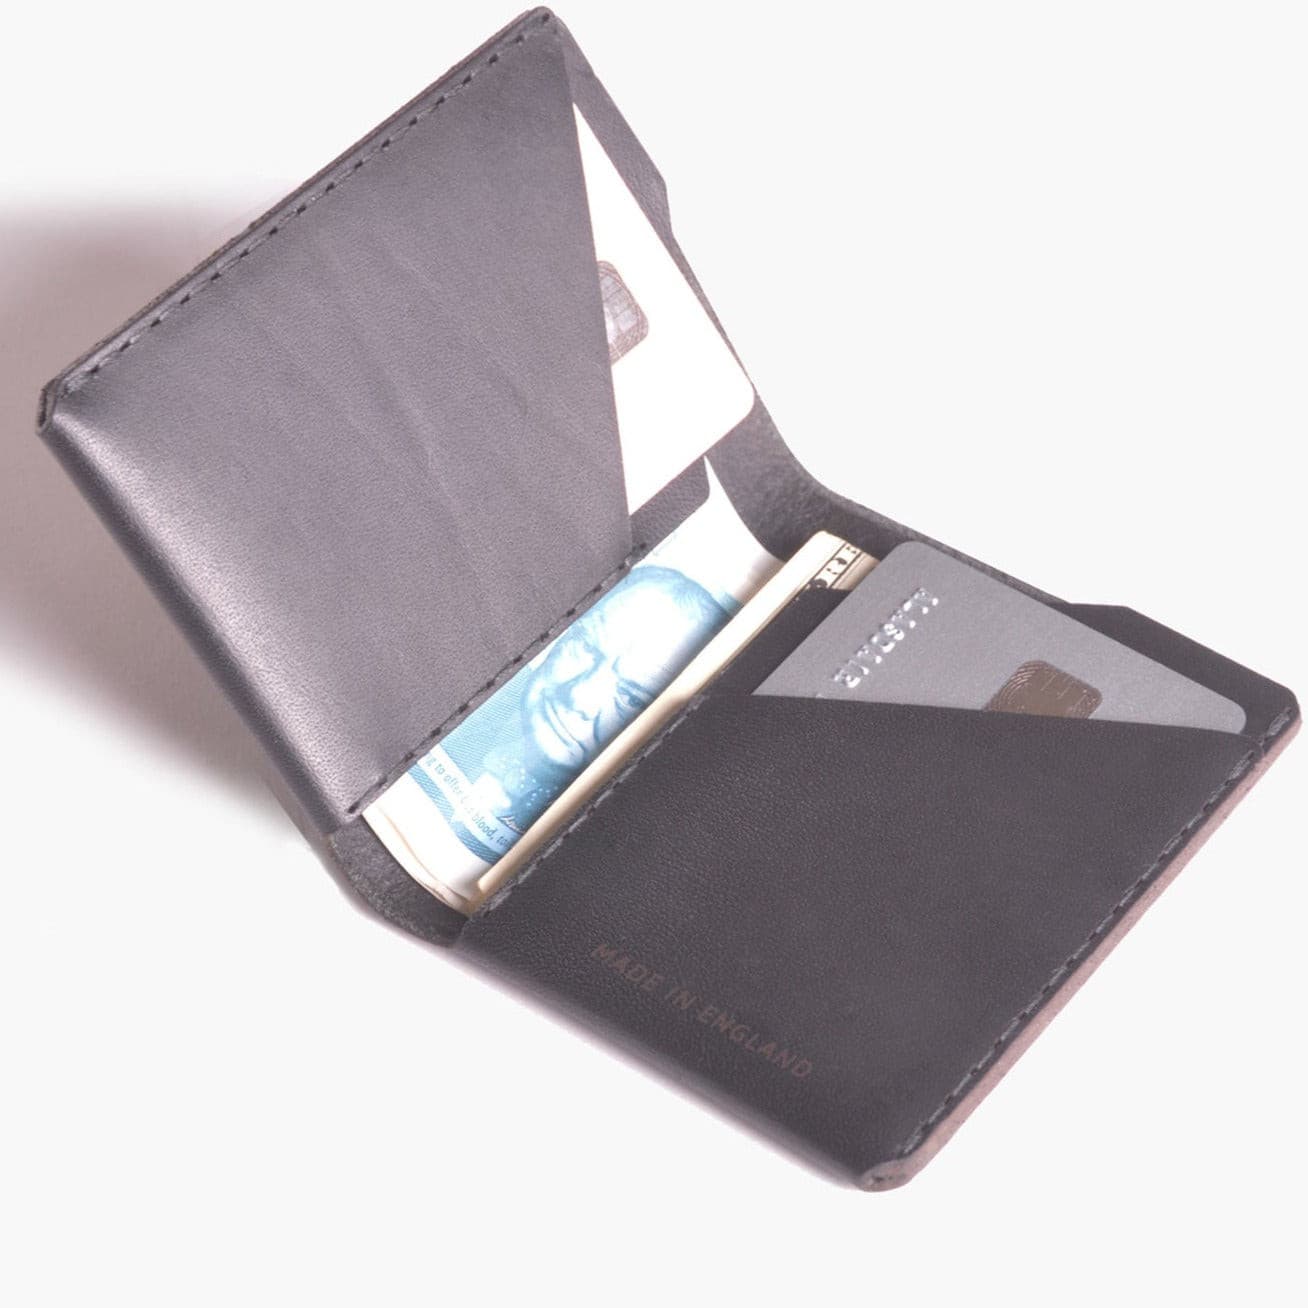 Wingback - Winston Wallet (Charcoal)